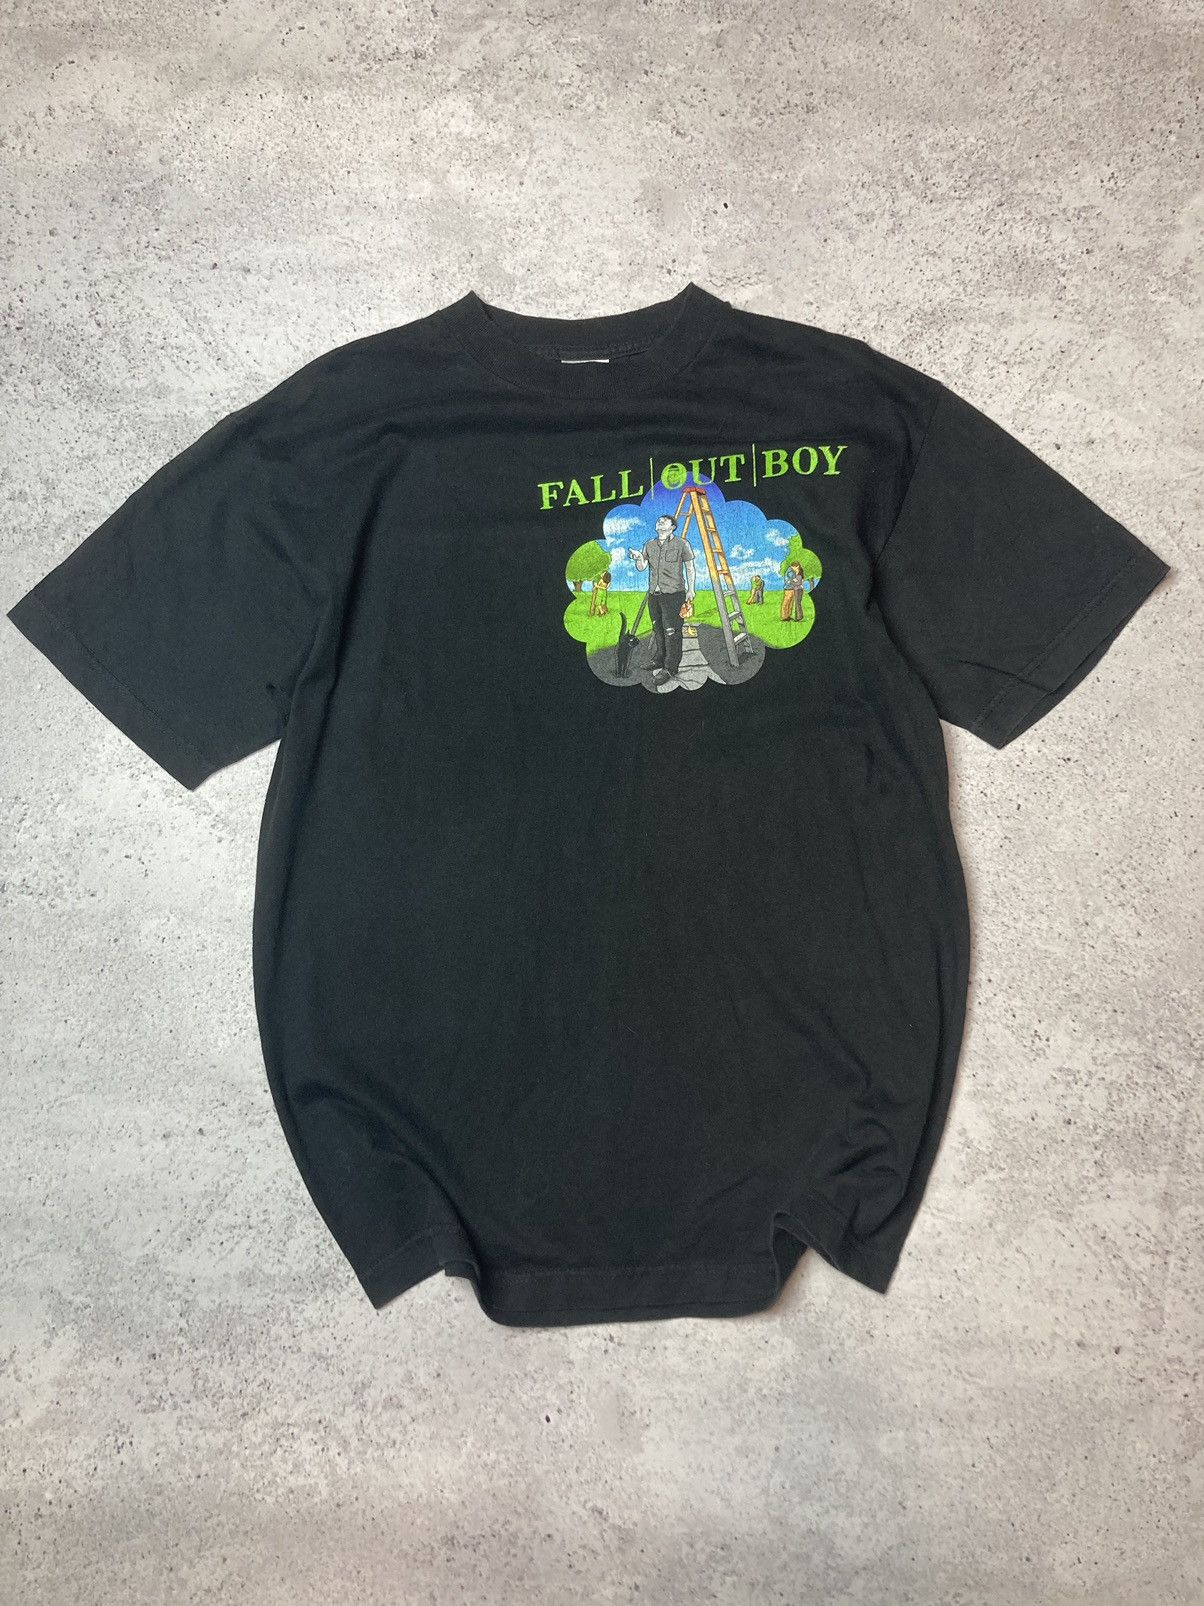 Pre-owned Rock Band X Rock T Shirt Fall Out Boys X Band Tees X Vintage 2007 In Black